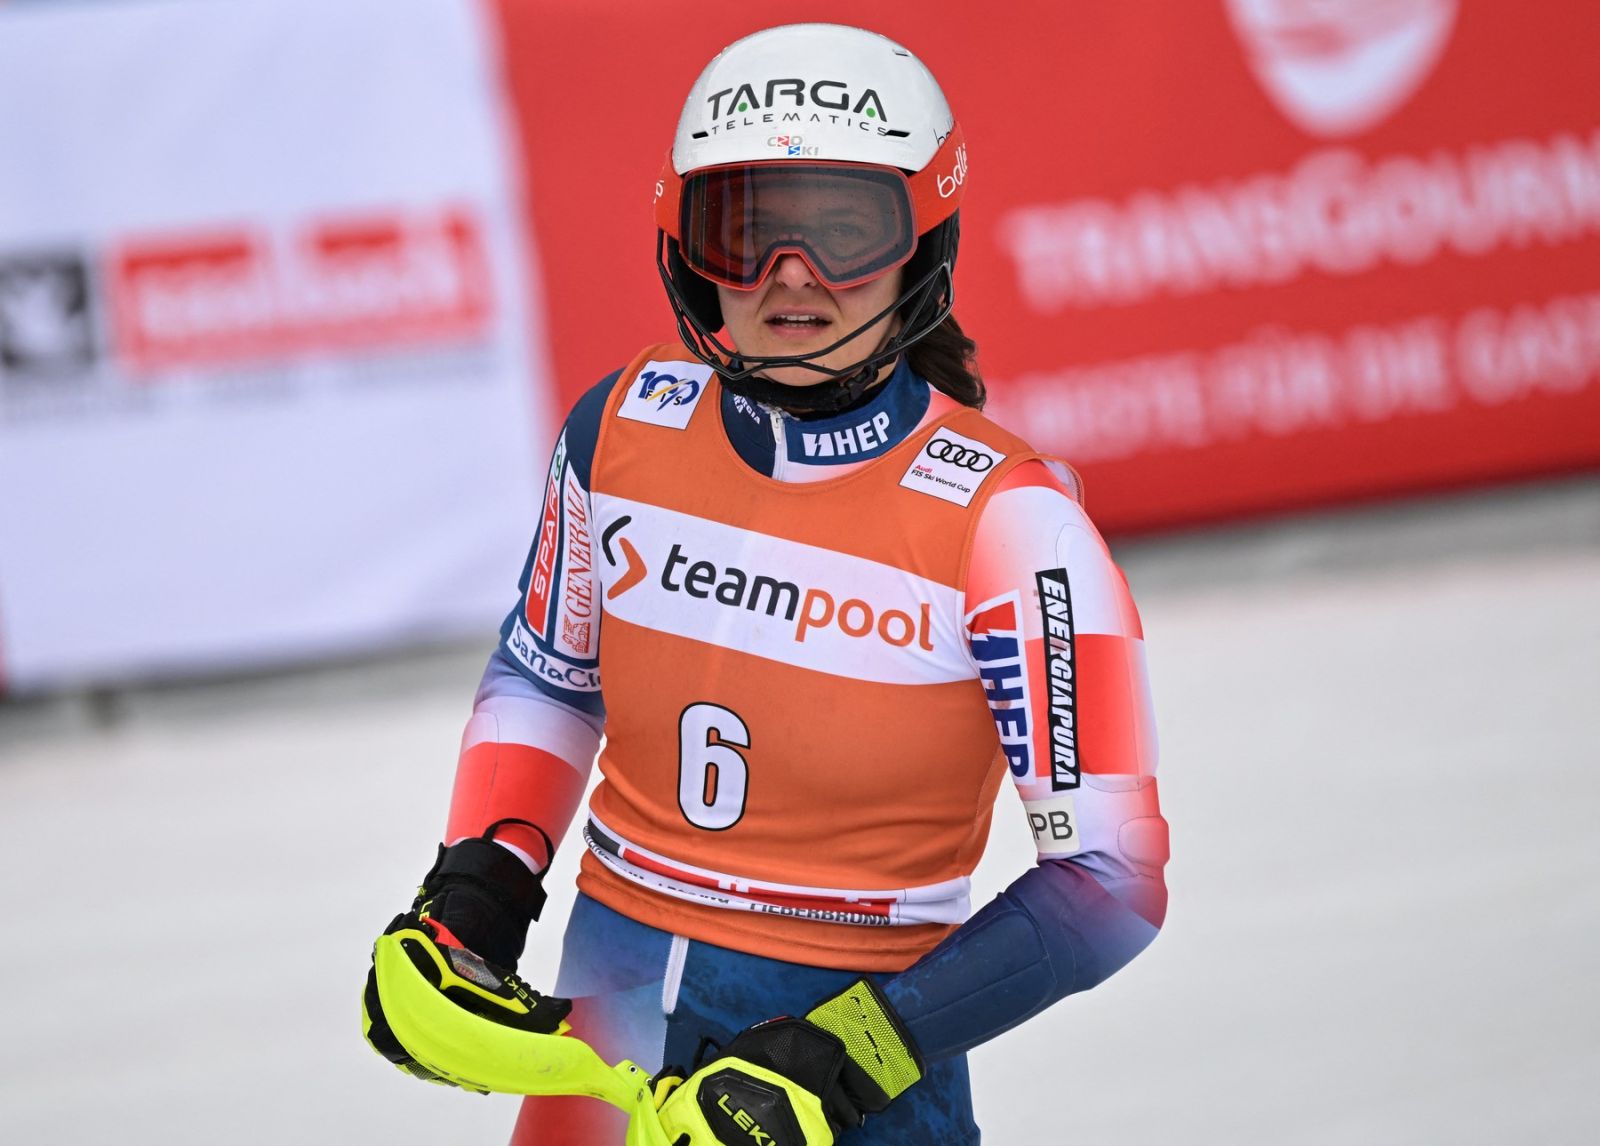 Croatia's Zrinka Ljutic reacts after competing in the women's Slalom event of FIS Ski Alpine World Cup in Saalbach, Austria on March 16, 2024.,Image: 857316340, License: Rights-managed, Restrictions: , Model Release: no, Credit line: Joe Klamar / AFP / Profimedia